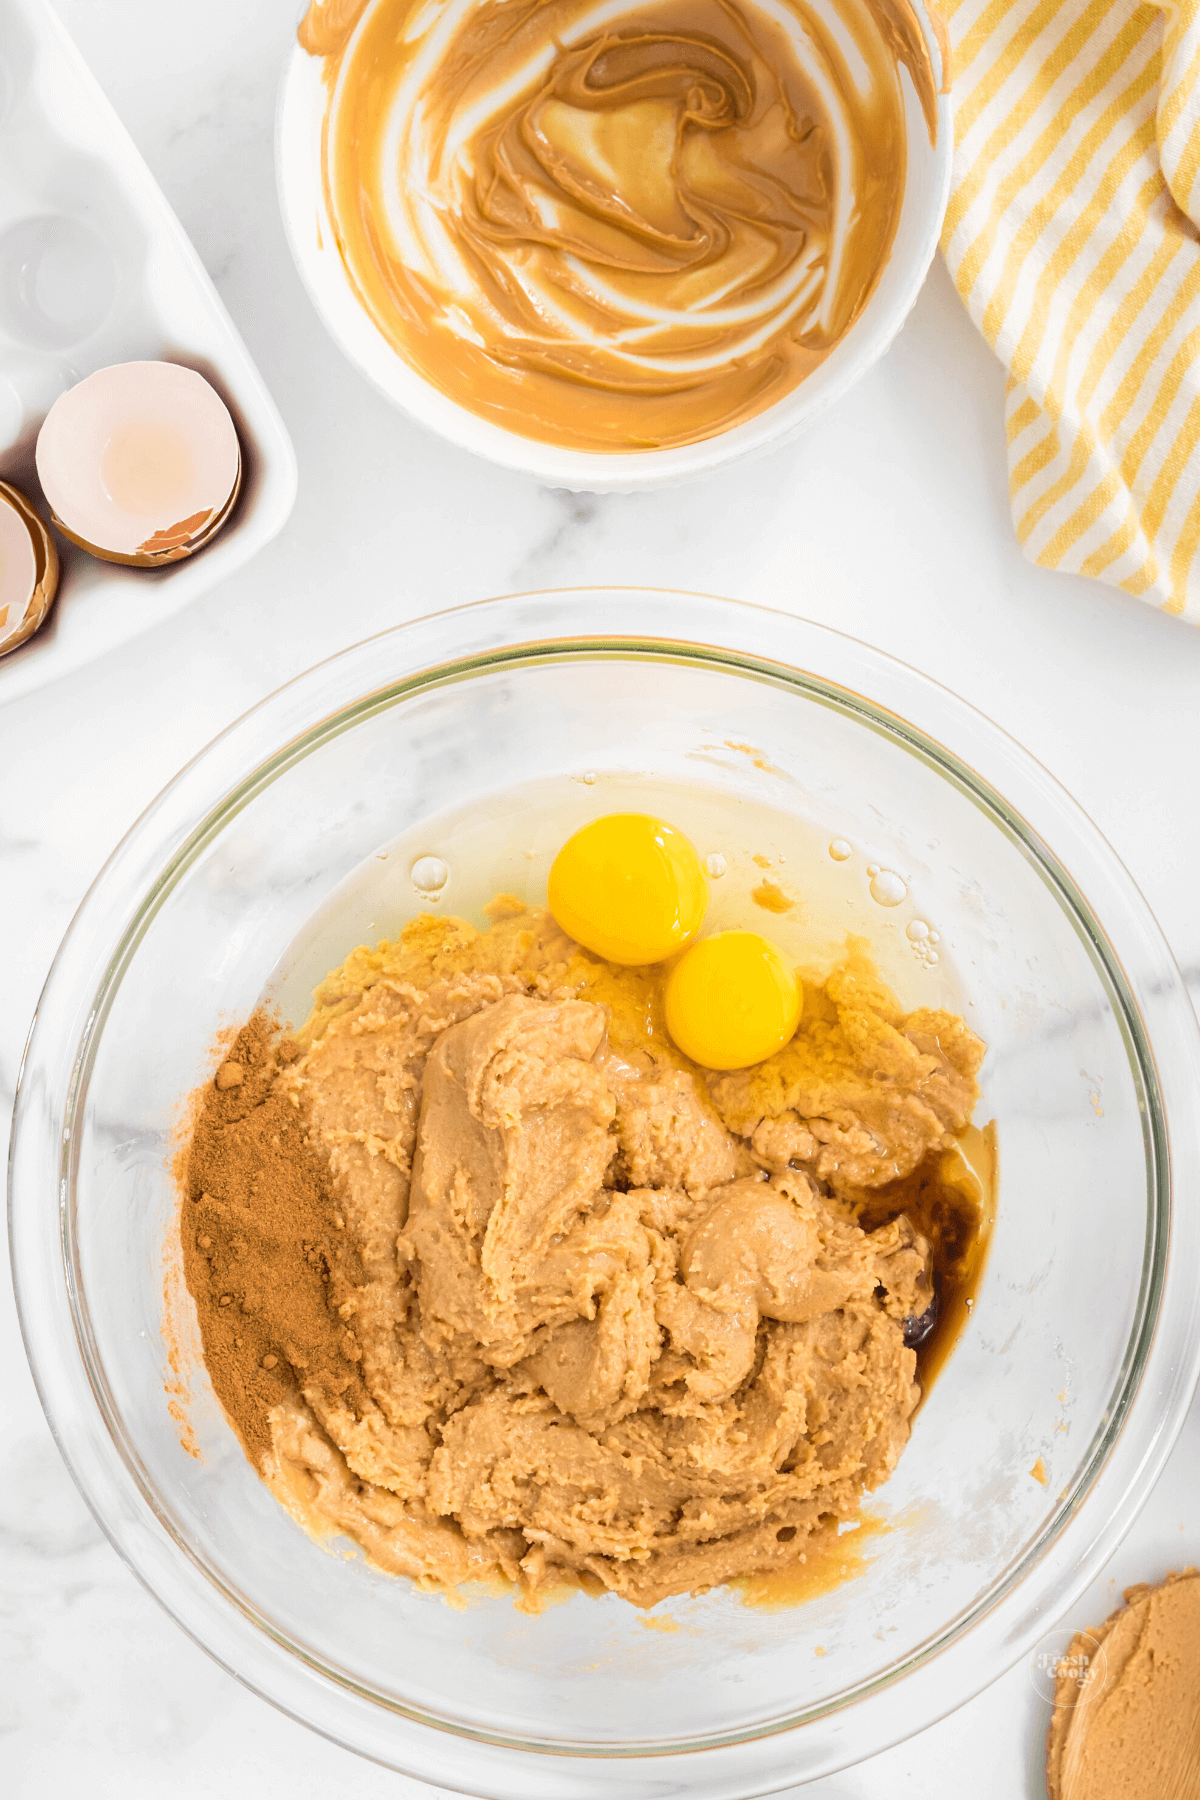 Peanut butter sugar mixture with eggs, cinnamon and vanilla added. 